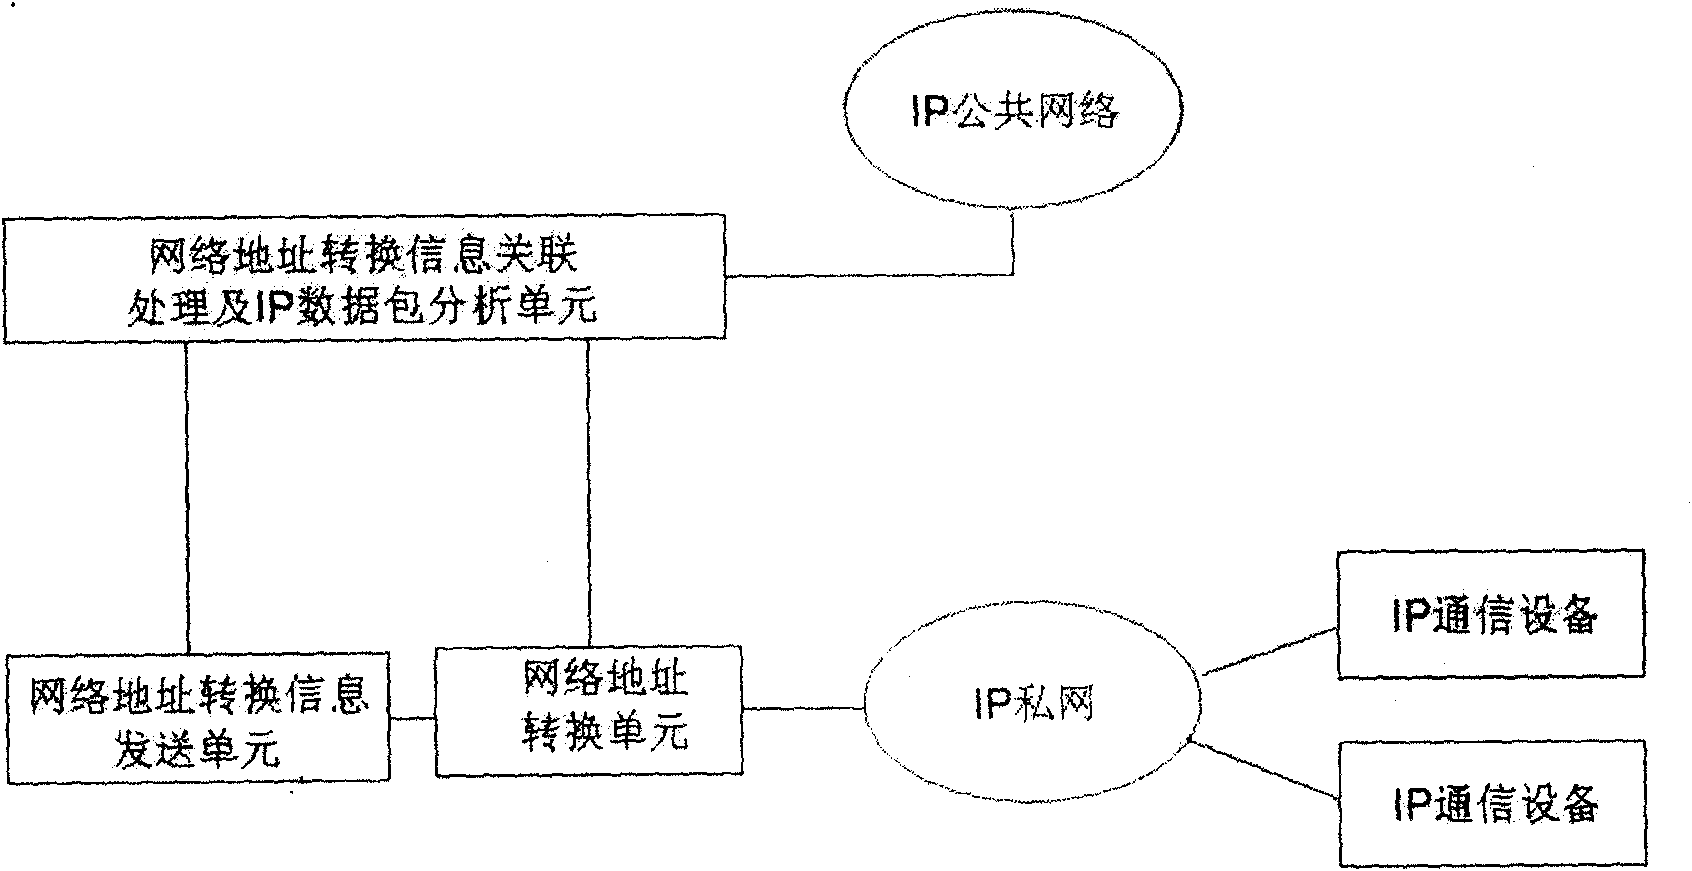 System for monitoring network communication data packets